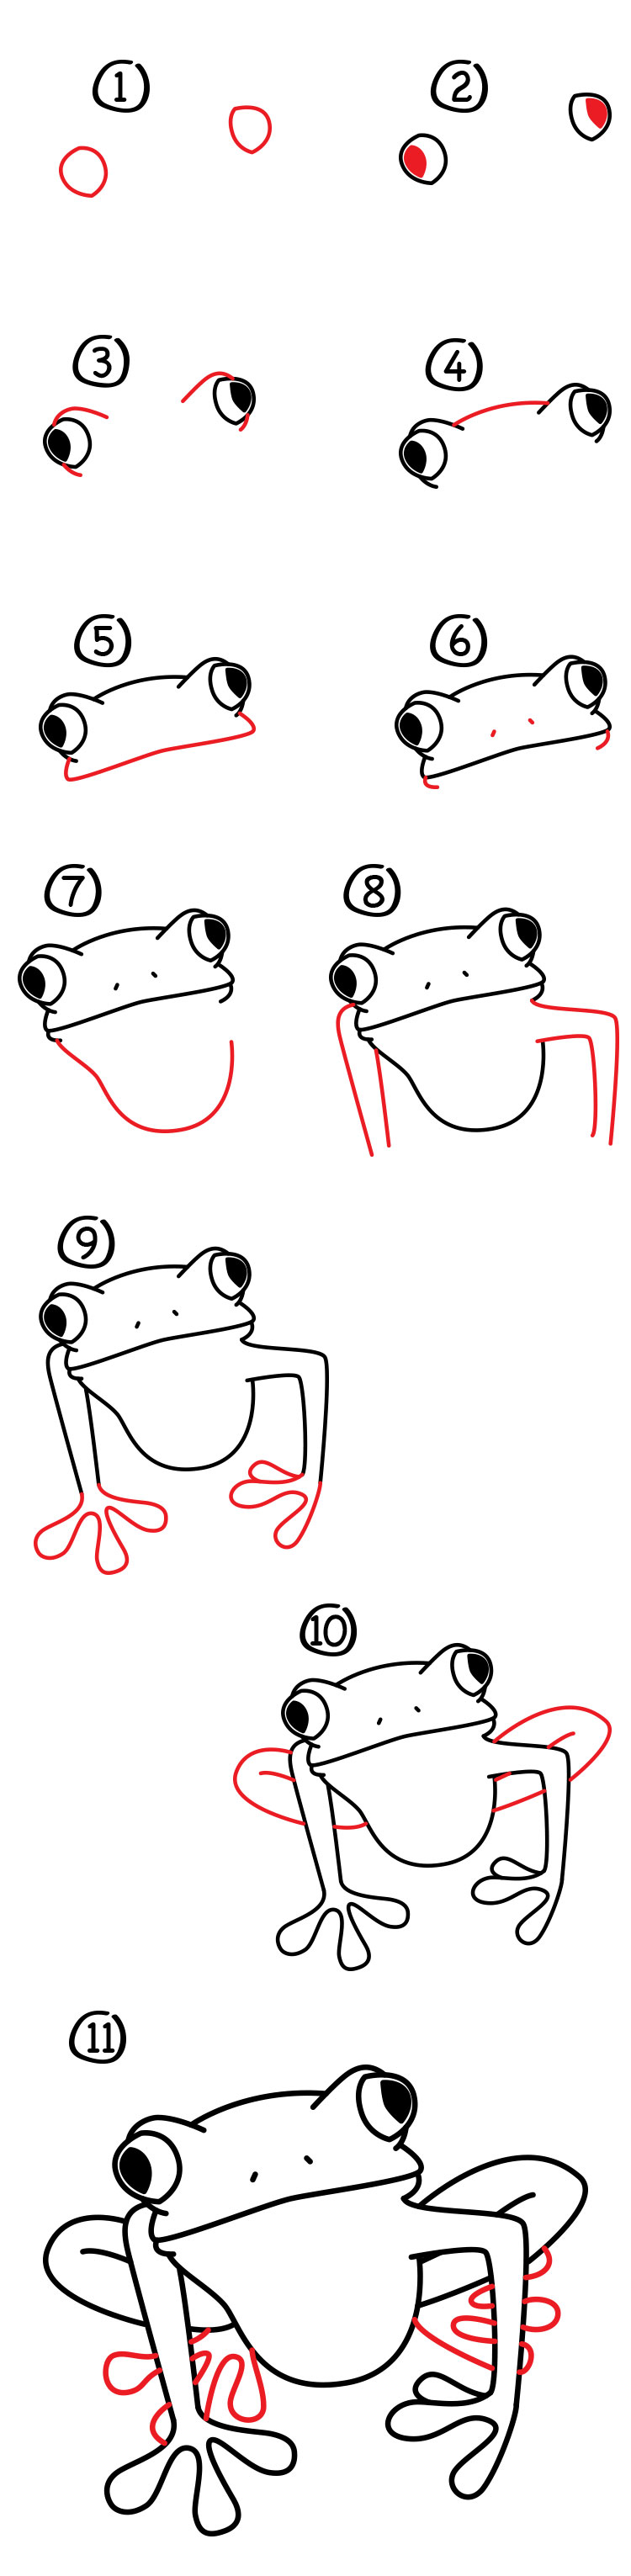 How To Draw A Tree Frog - Art For Kids Hub